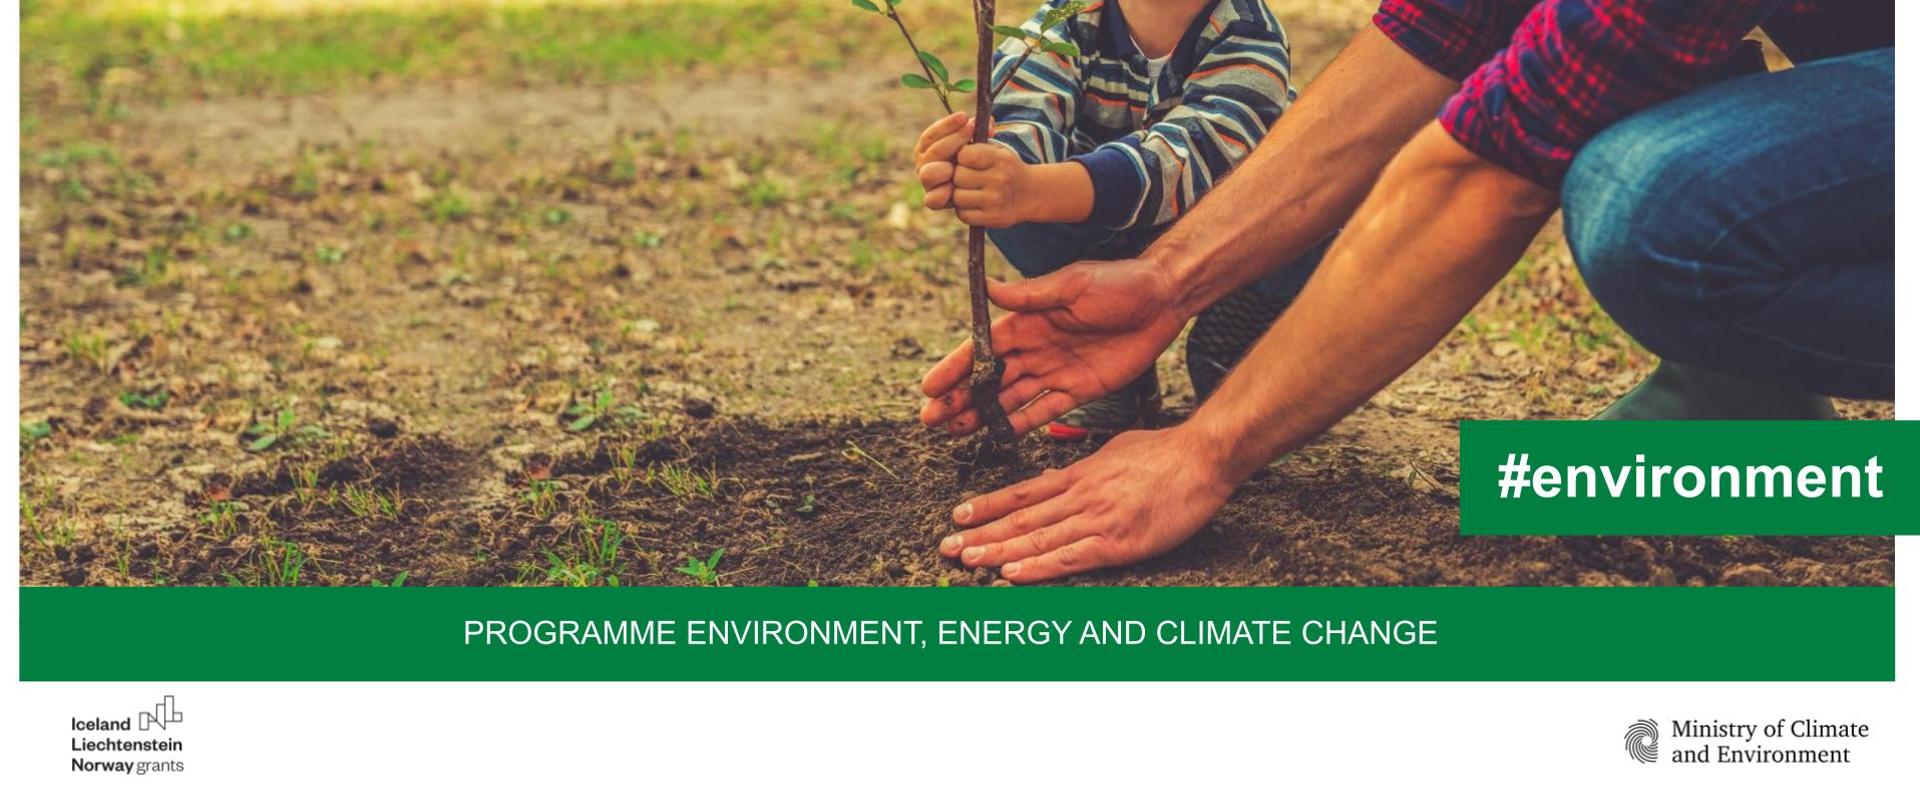 Environment Energy and Climate Change Programme #environment NGO's